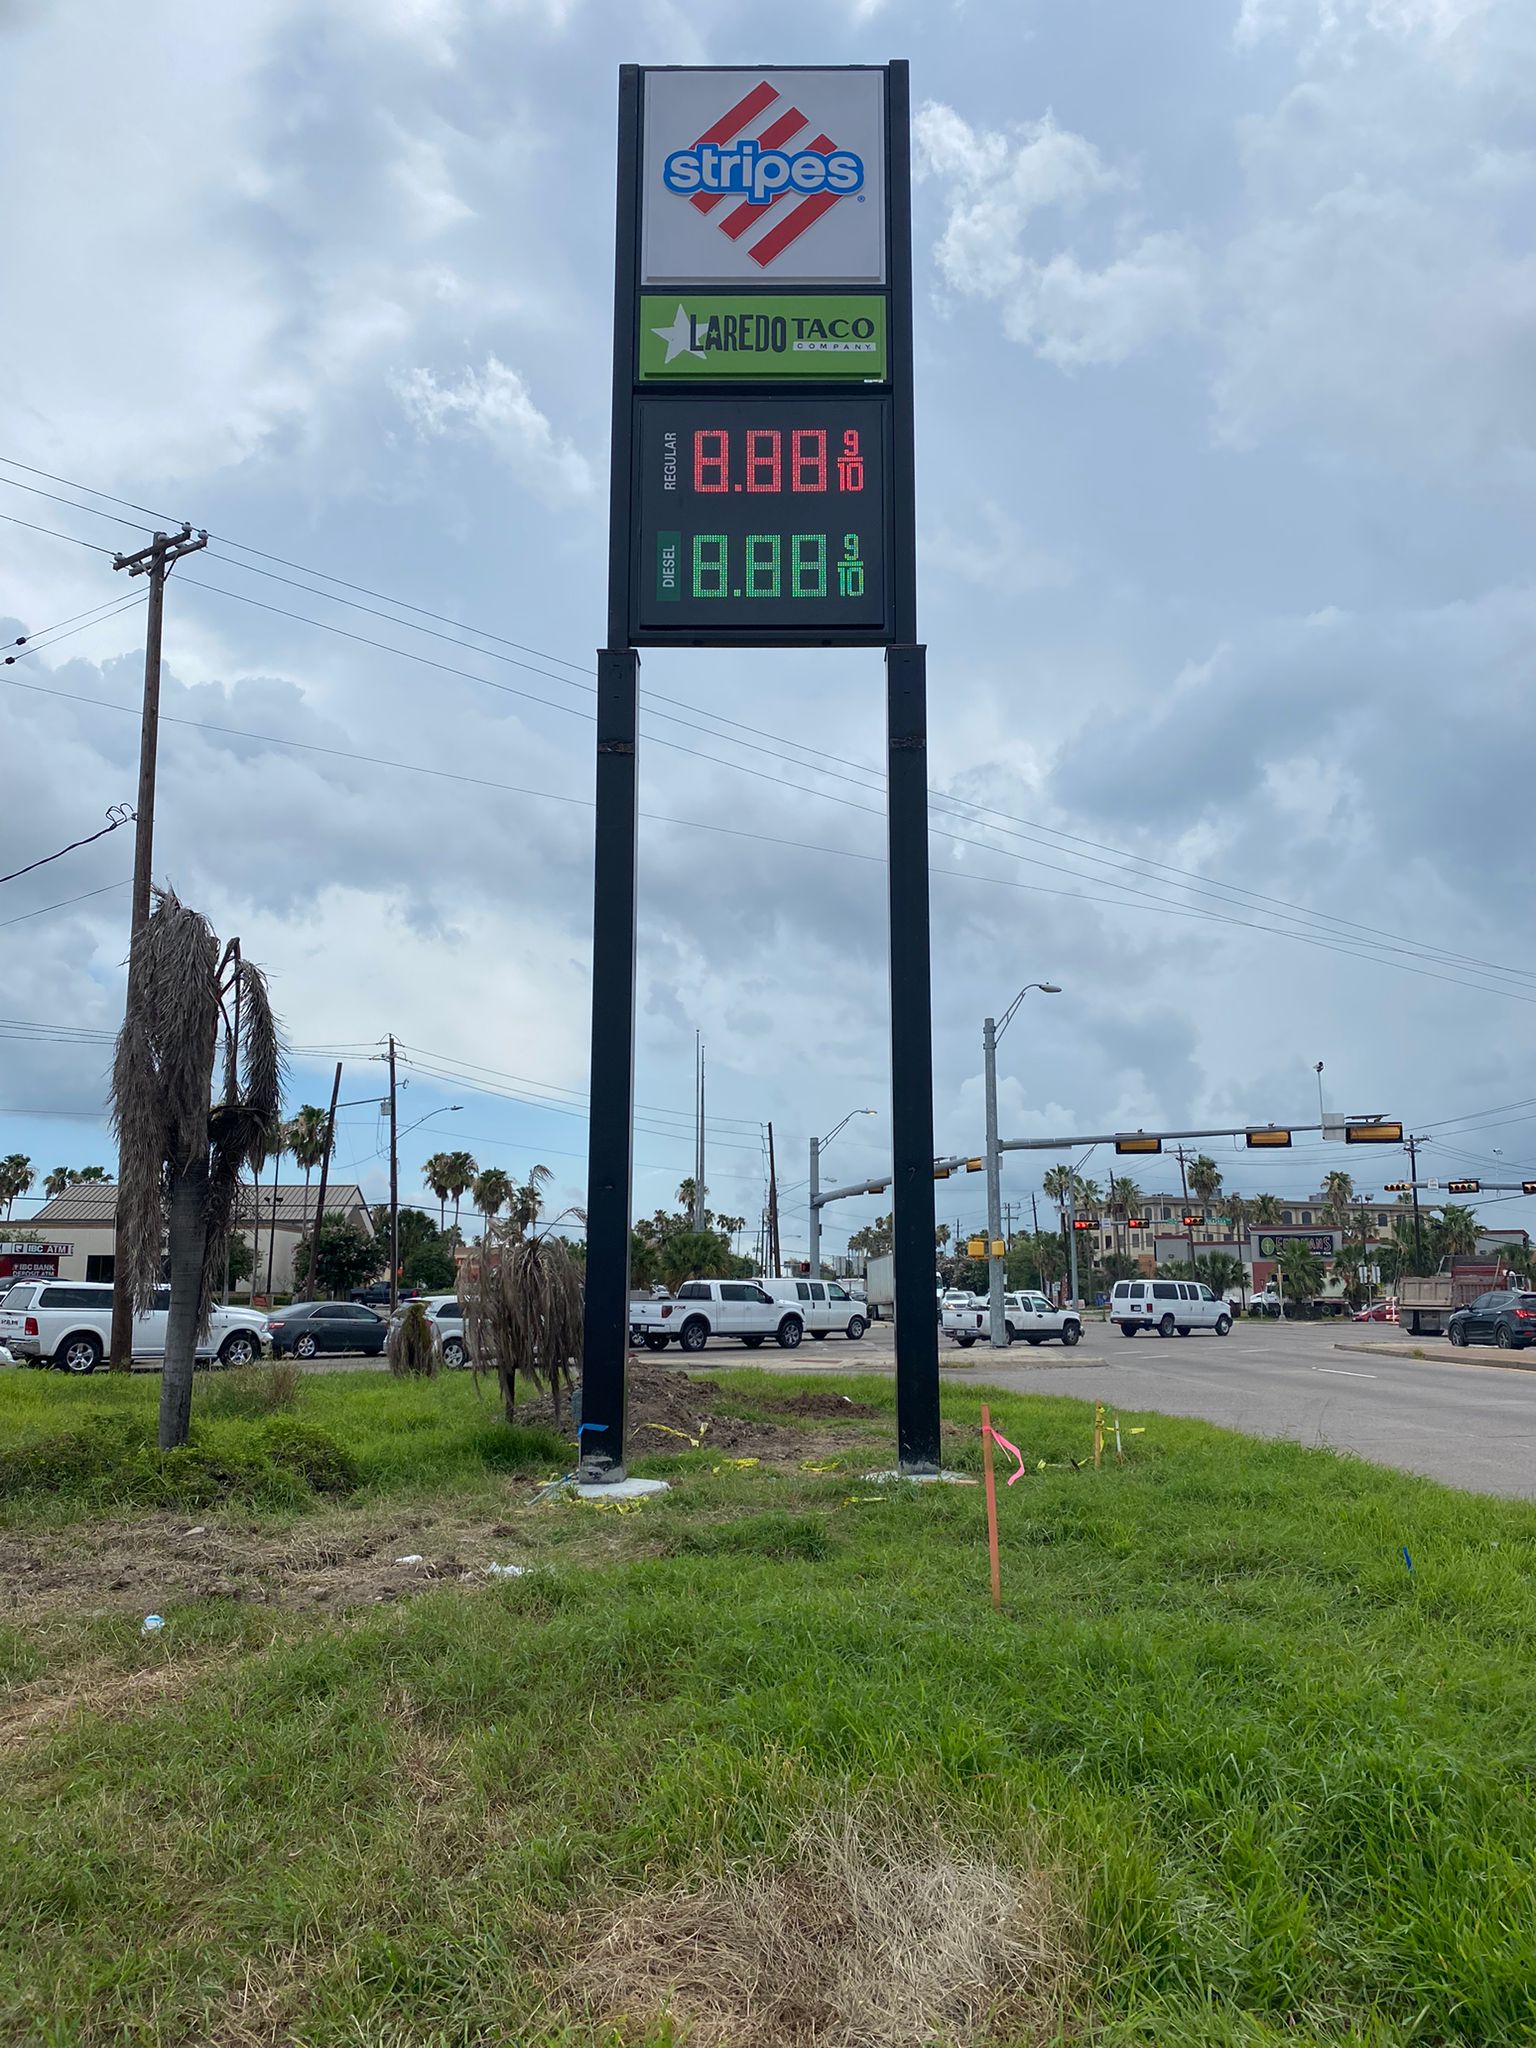 Implemented a state-of-the-art digital pylon for Stripes, showcasing fuel prices and Laredo Taco Company's offerings.